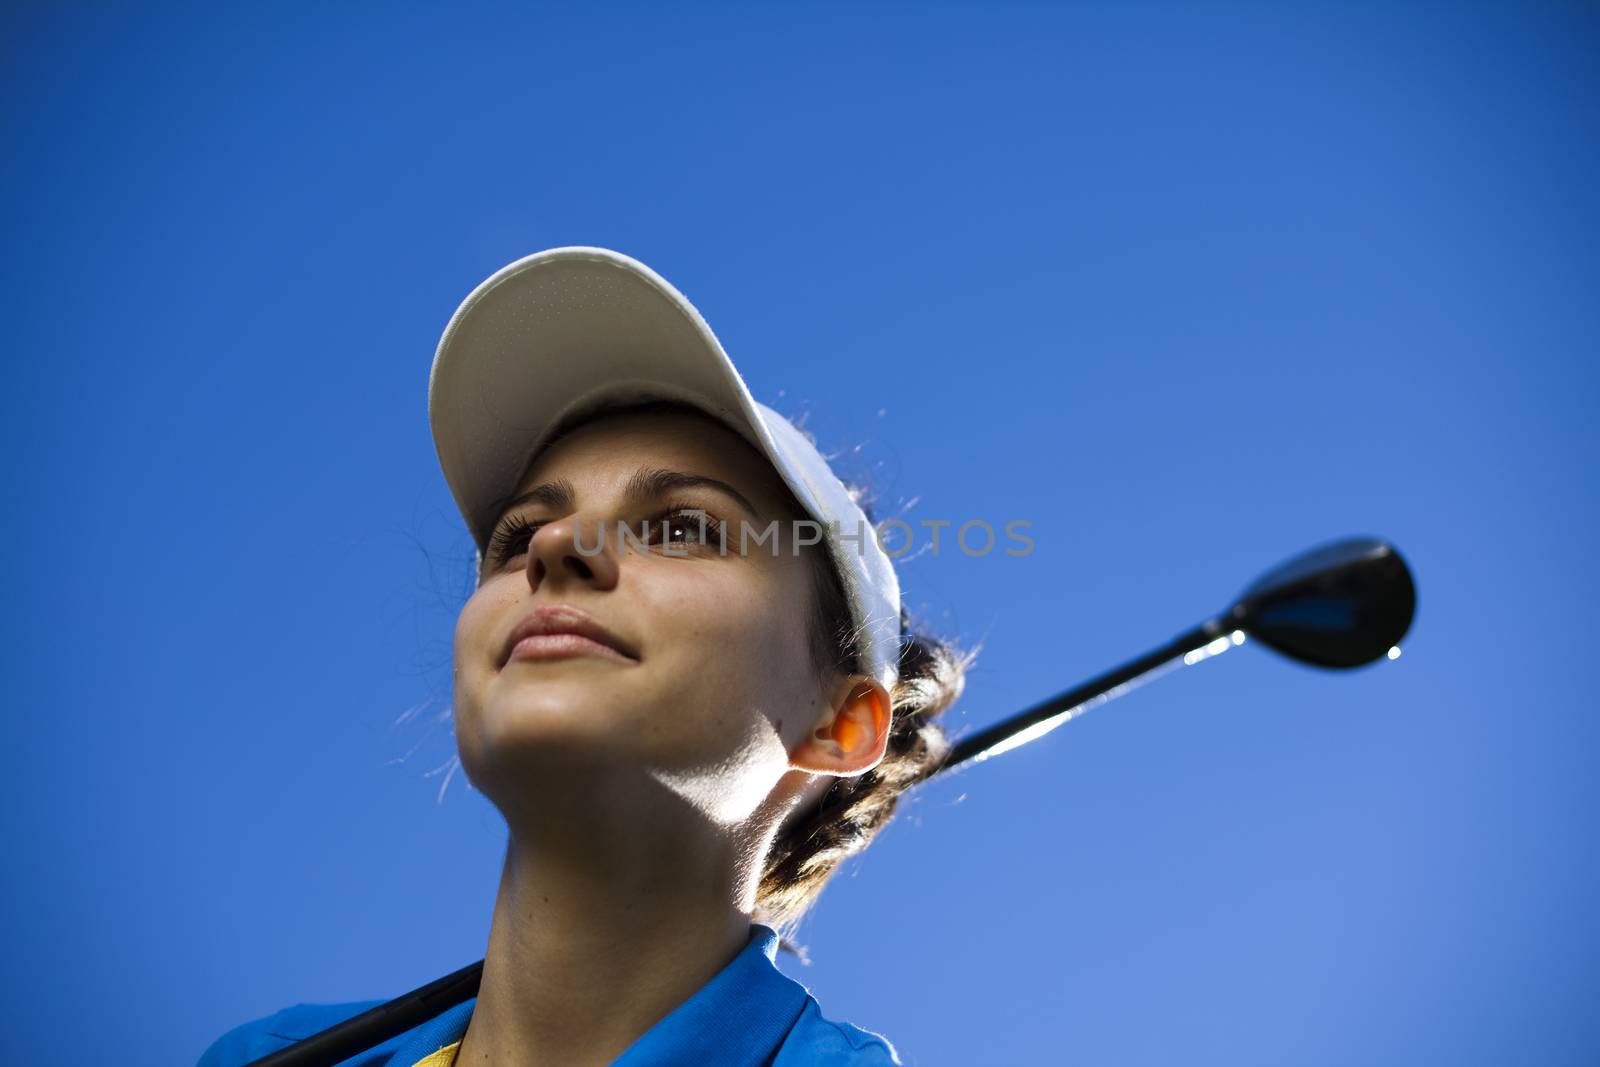 Thumbs up on golf, bright colorful vivid theme